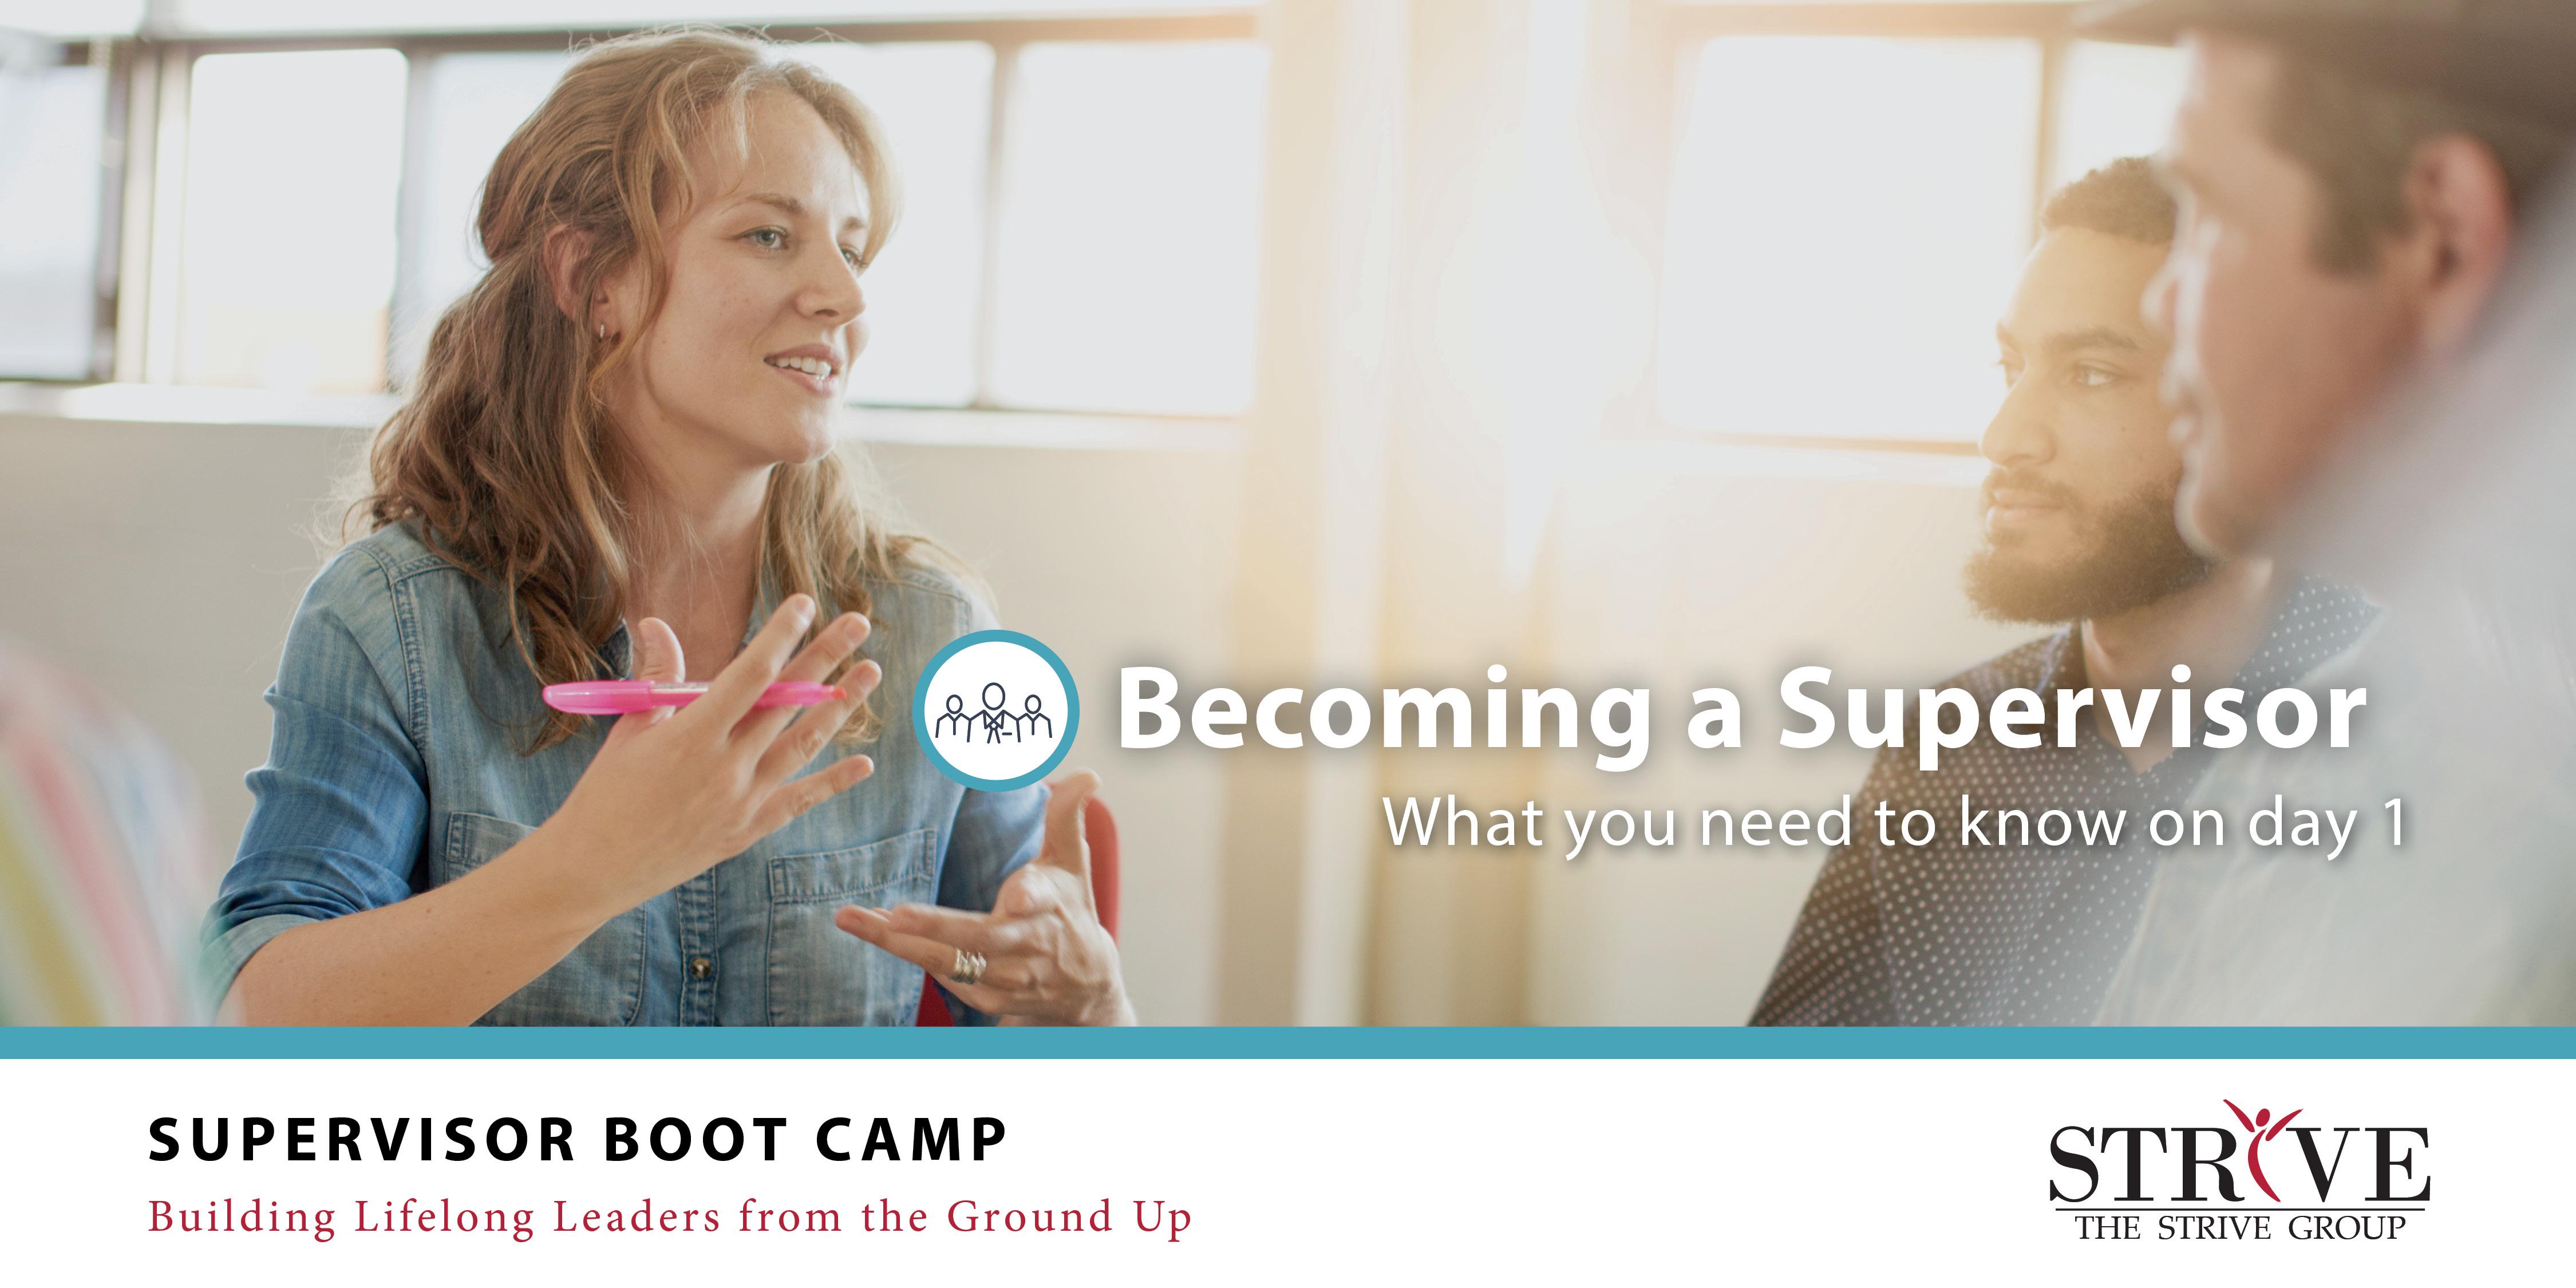 Becoming a Supervisor: What You Need to Know on Day 1